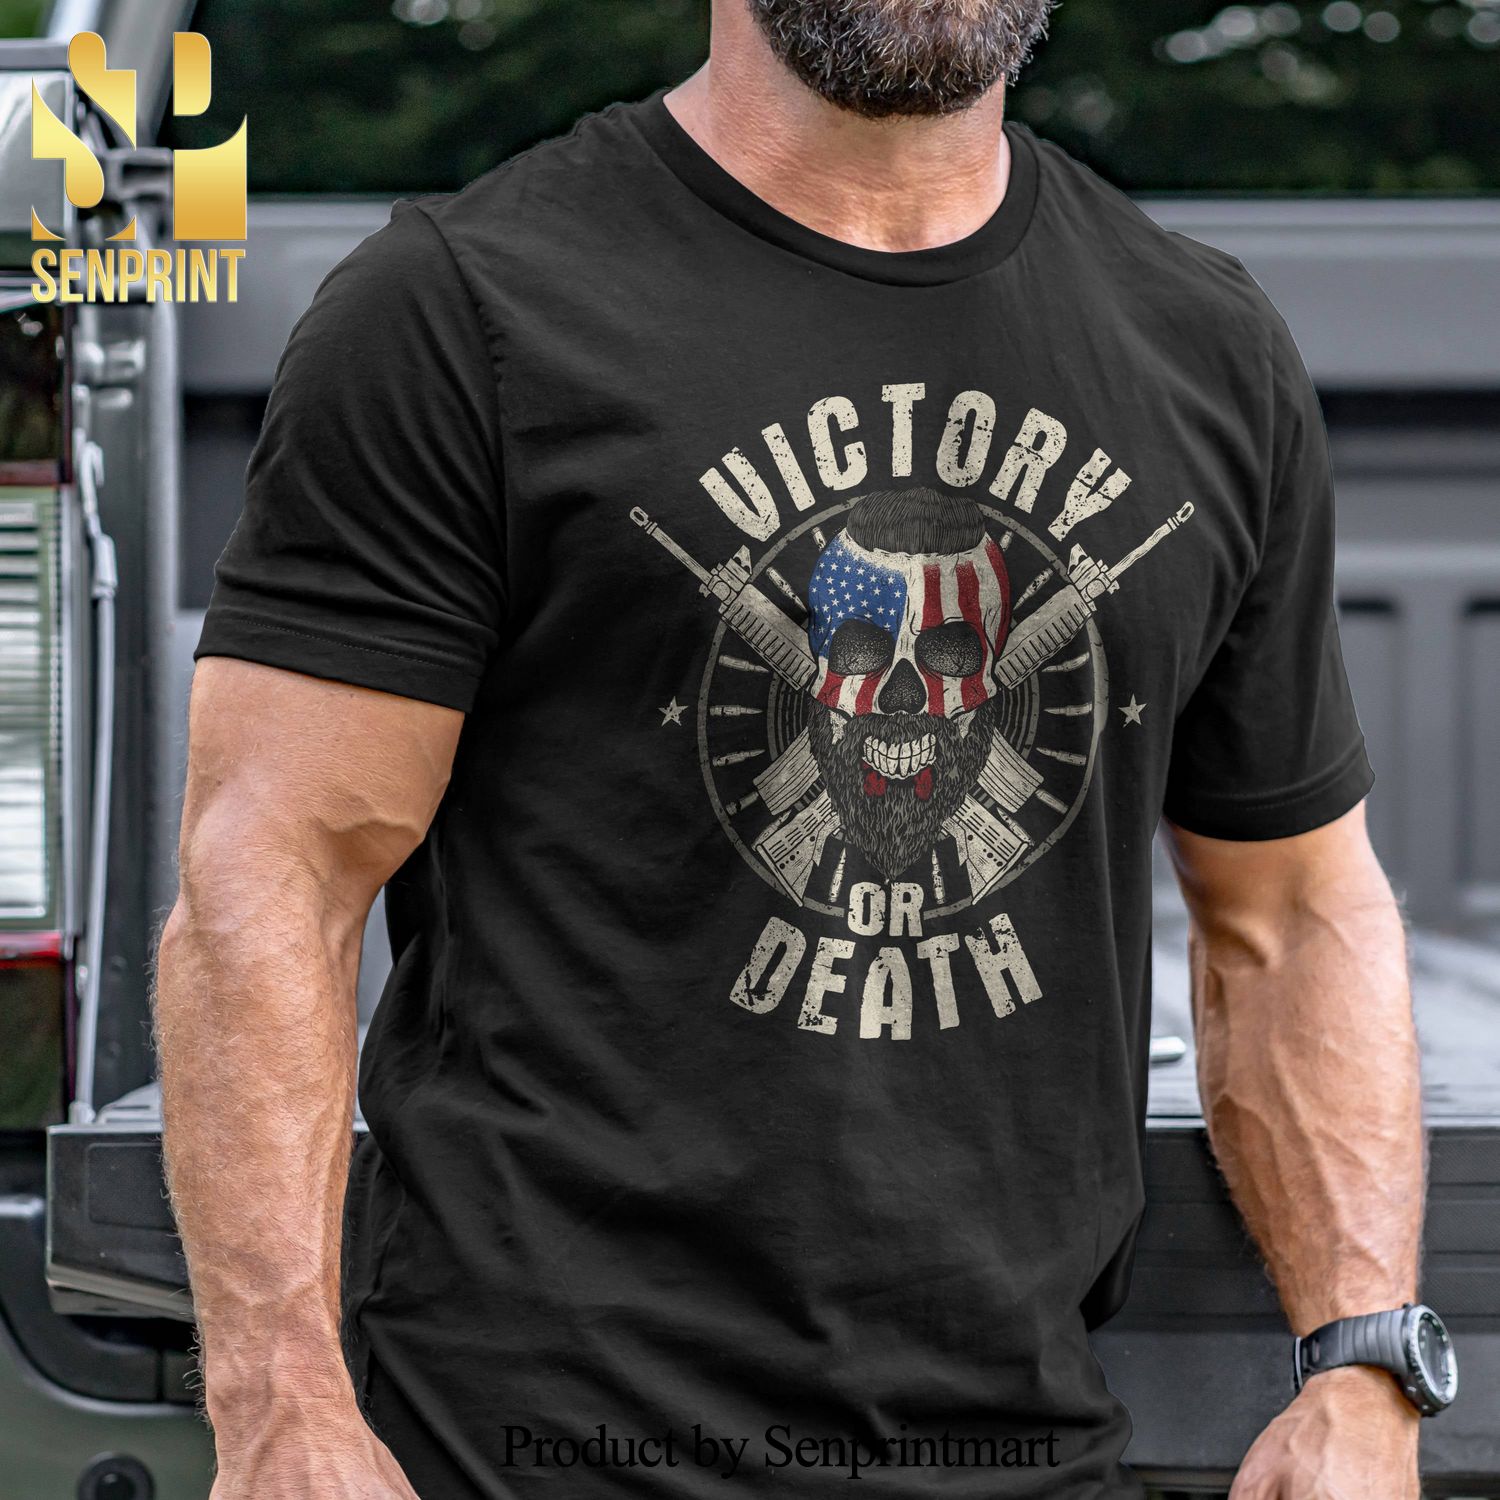 Victory or Death Military Unisex Shirt